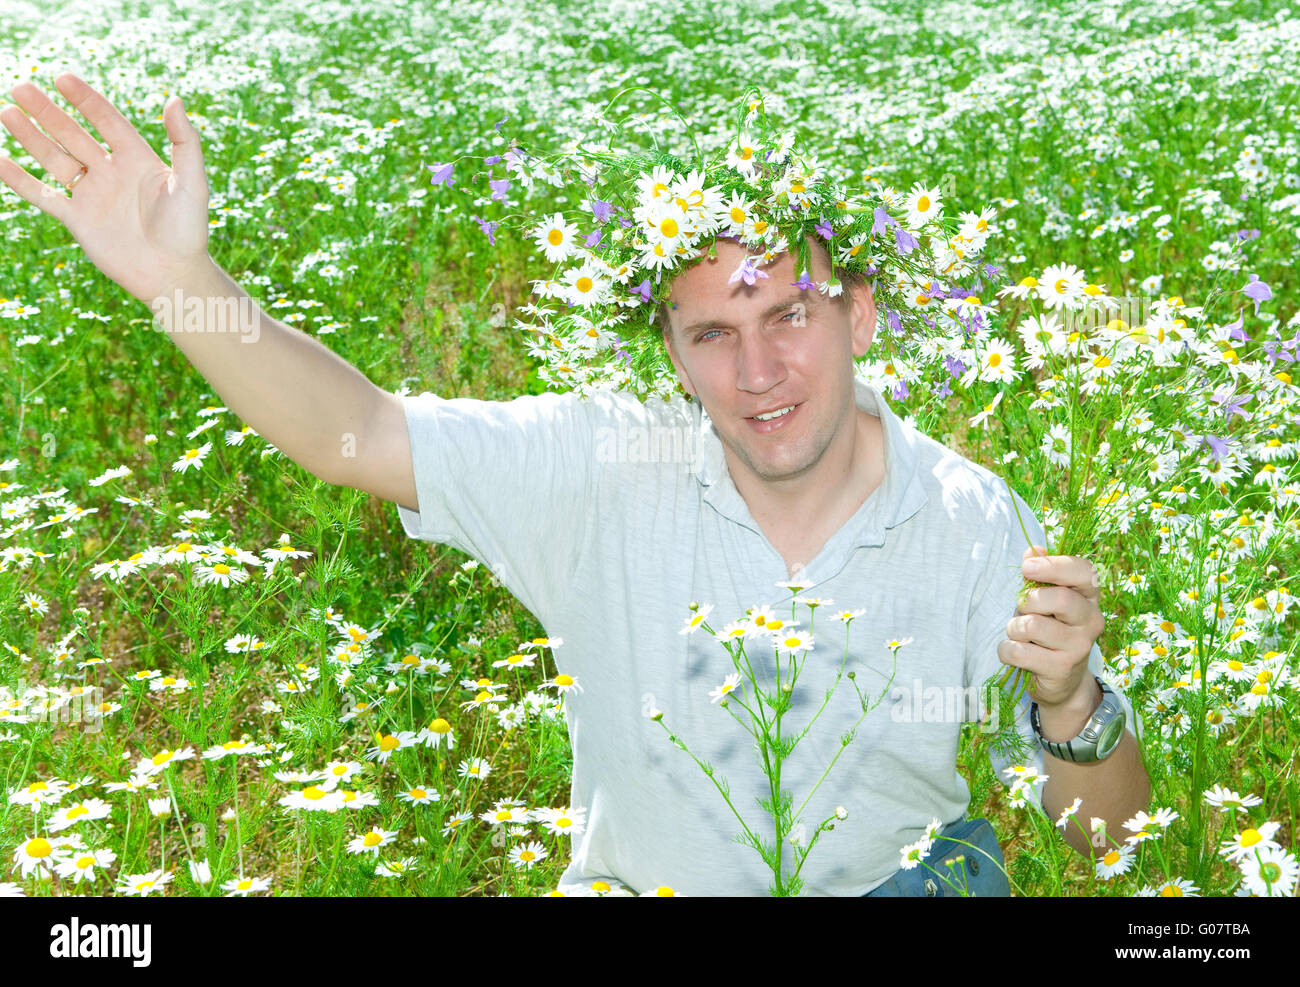 man in a wreath from wild flowers in the field of Stock Photo